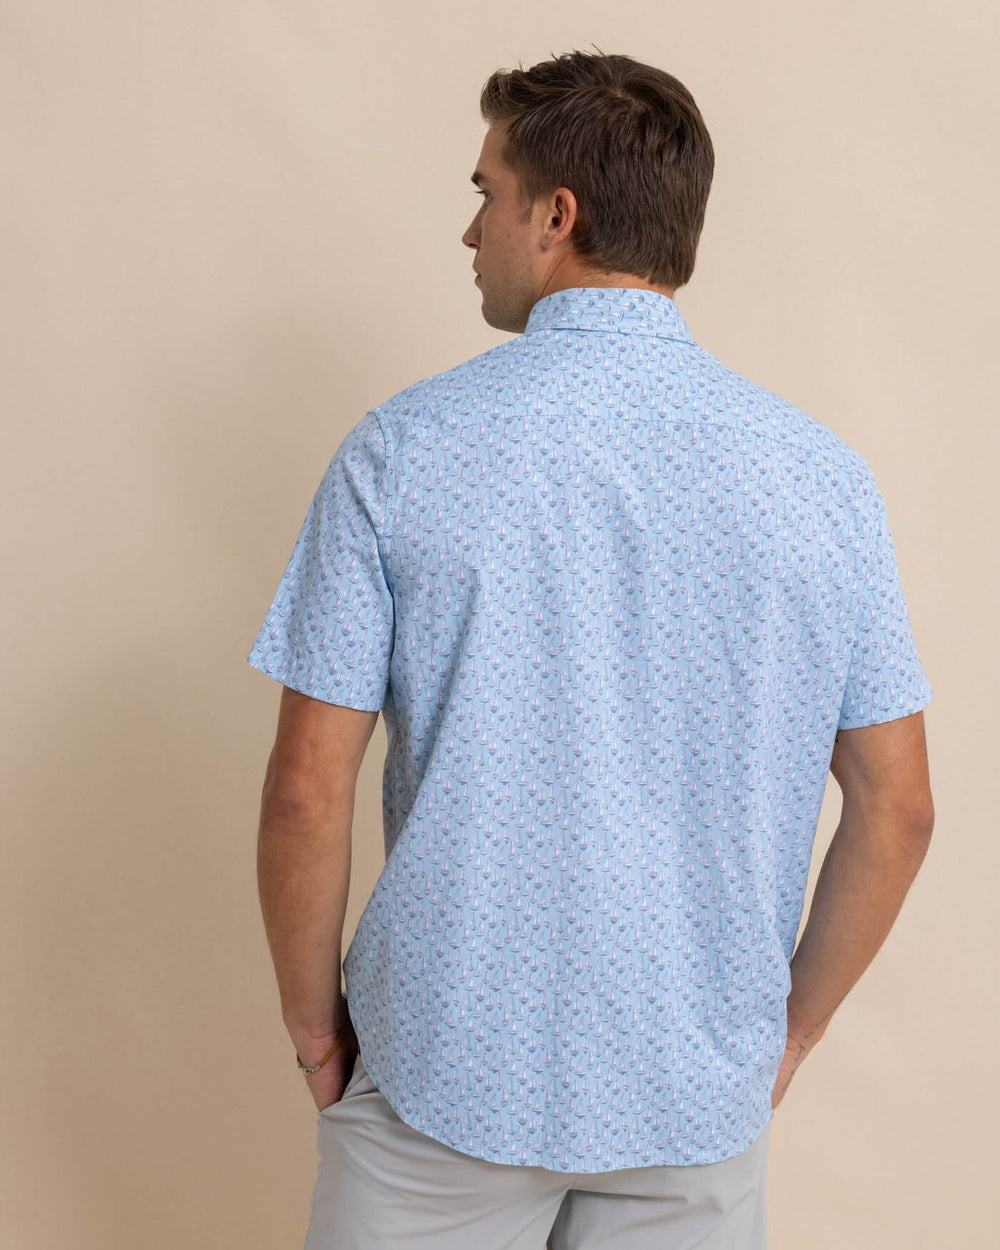 The back view of the Southern Tide Intercoastal Forget A-Boat It Short Sleeve SportShirt by Southern Tide - Clearwater Blue